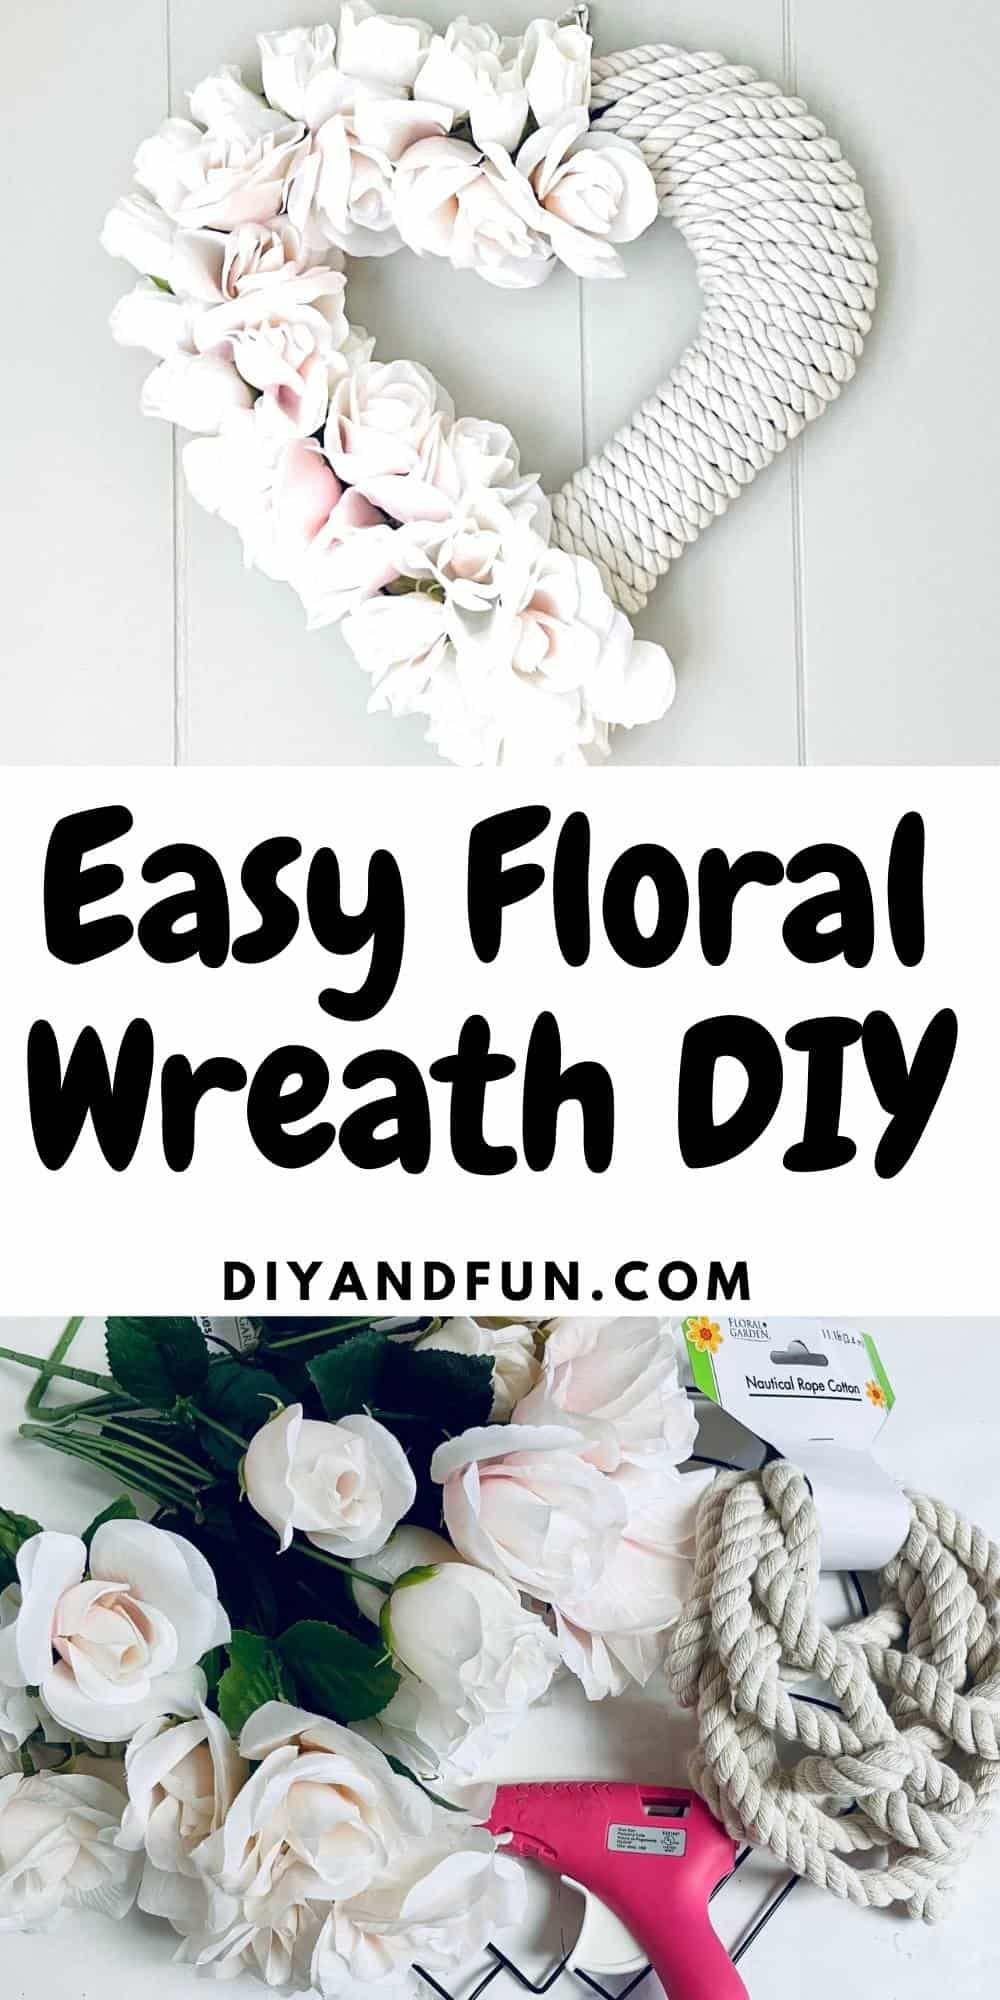 Easy Floral Wreath DIY, a simple do it yourself craft idea using inexpensive materials. Perfect for Valentines day or any time!